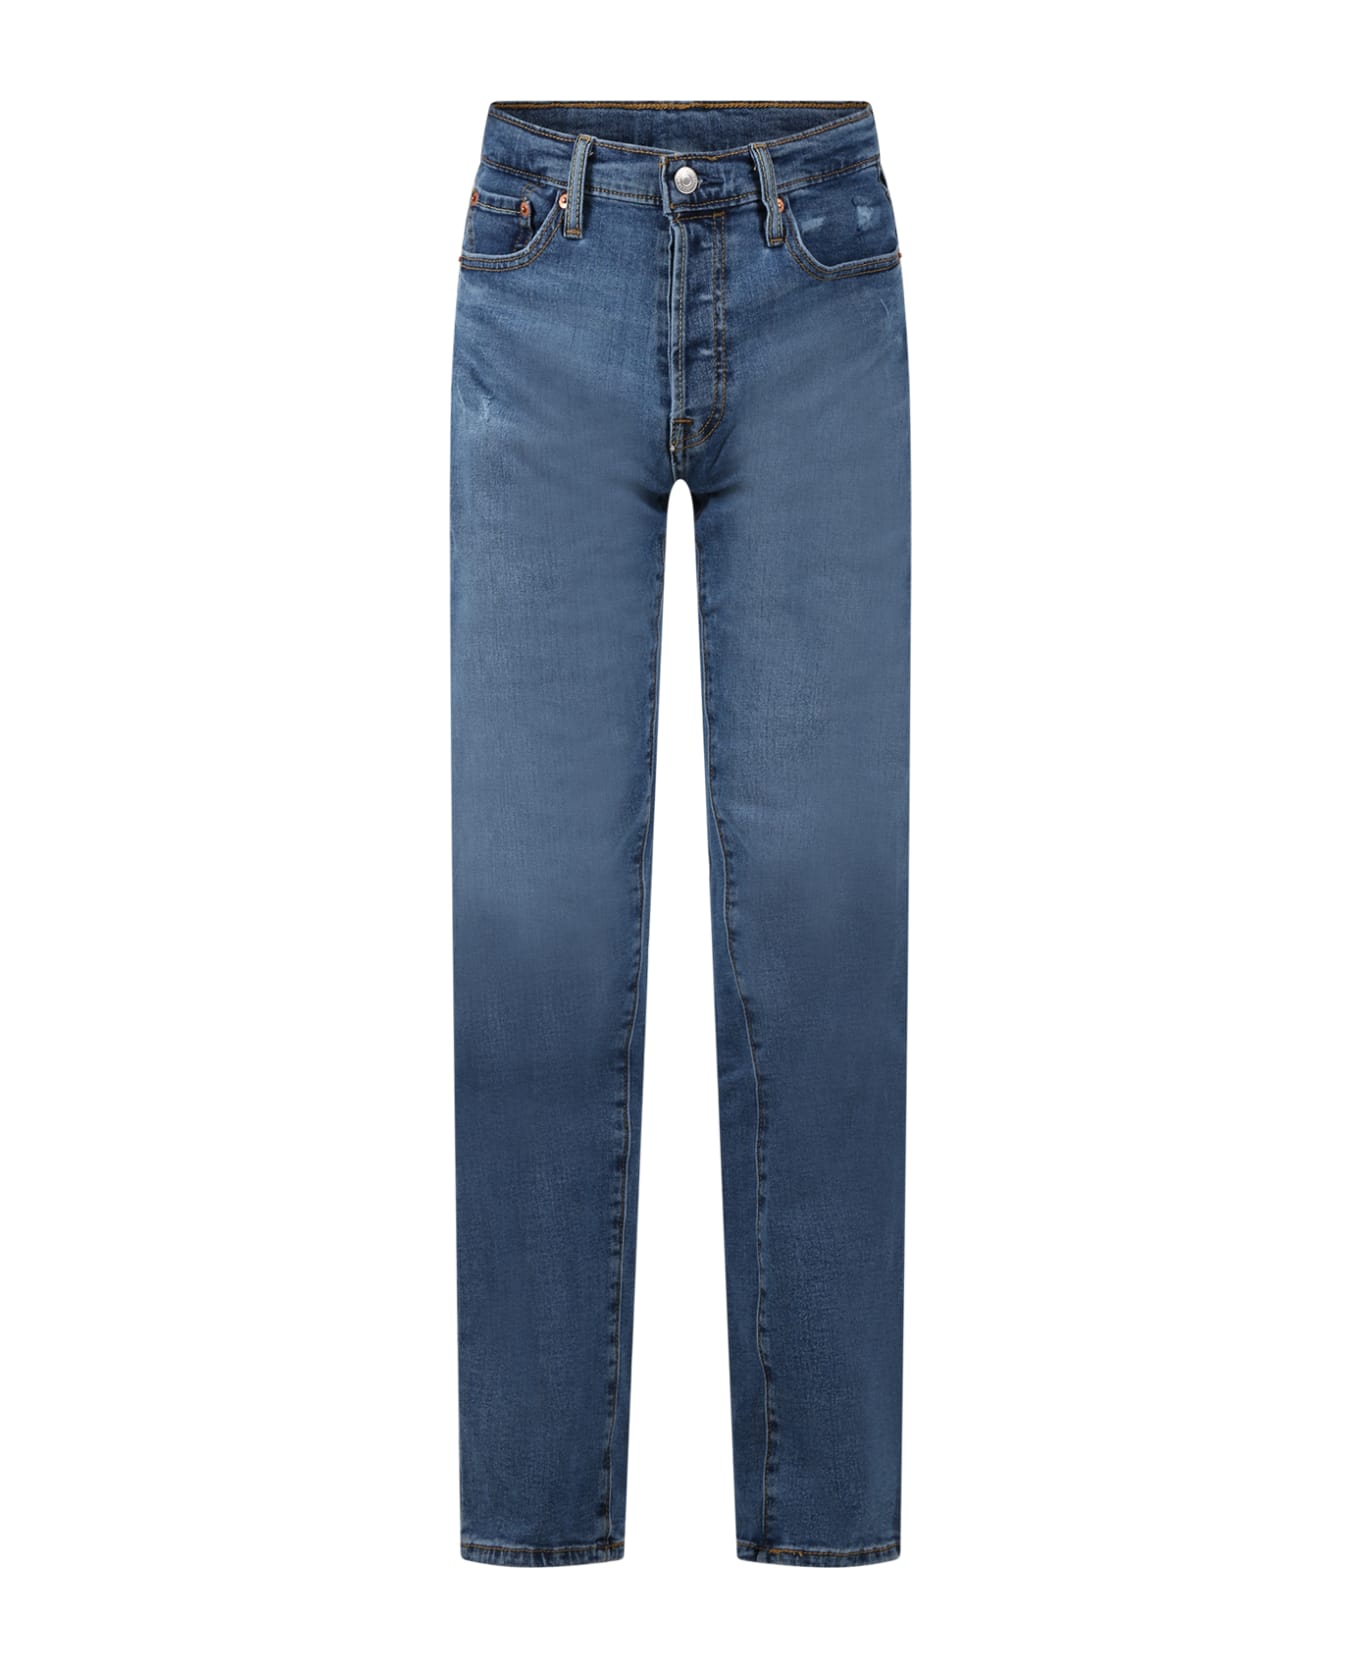 Levi's Blue Jeans For Boy With Logo - Denim ボトムス